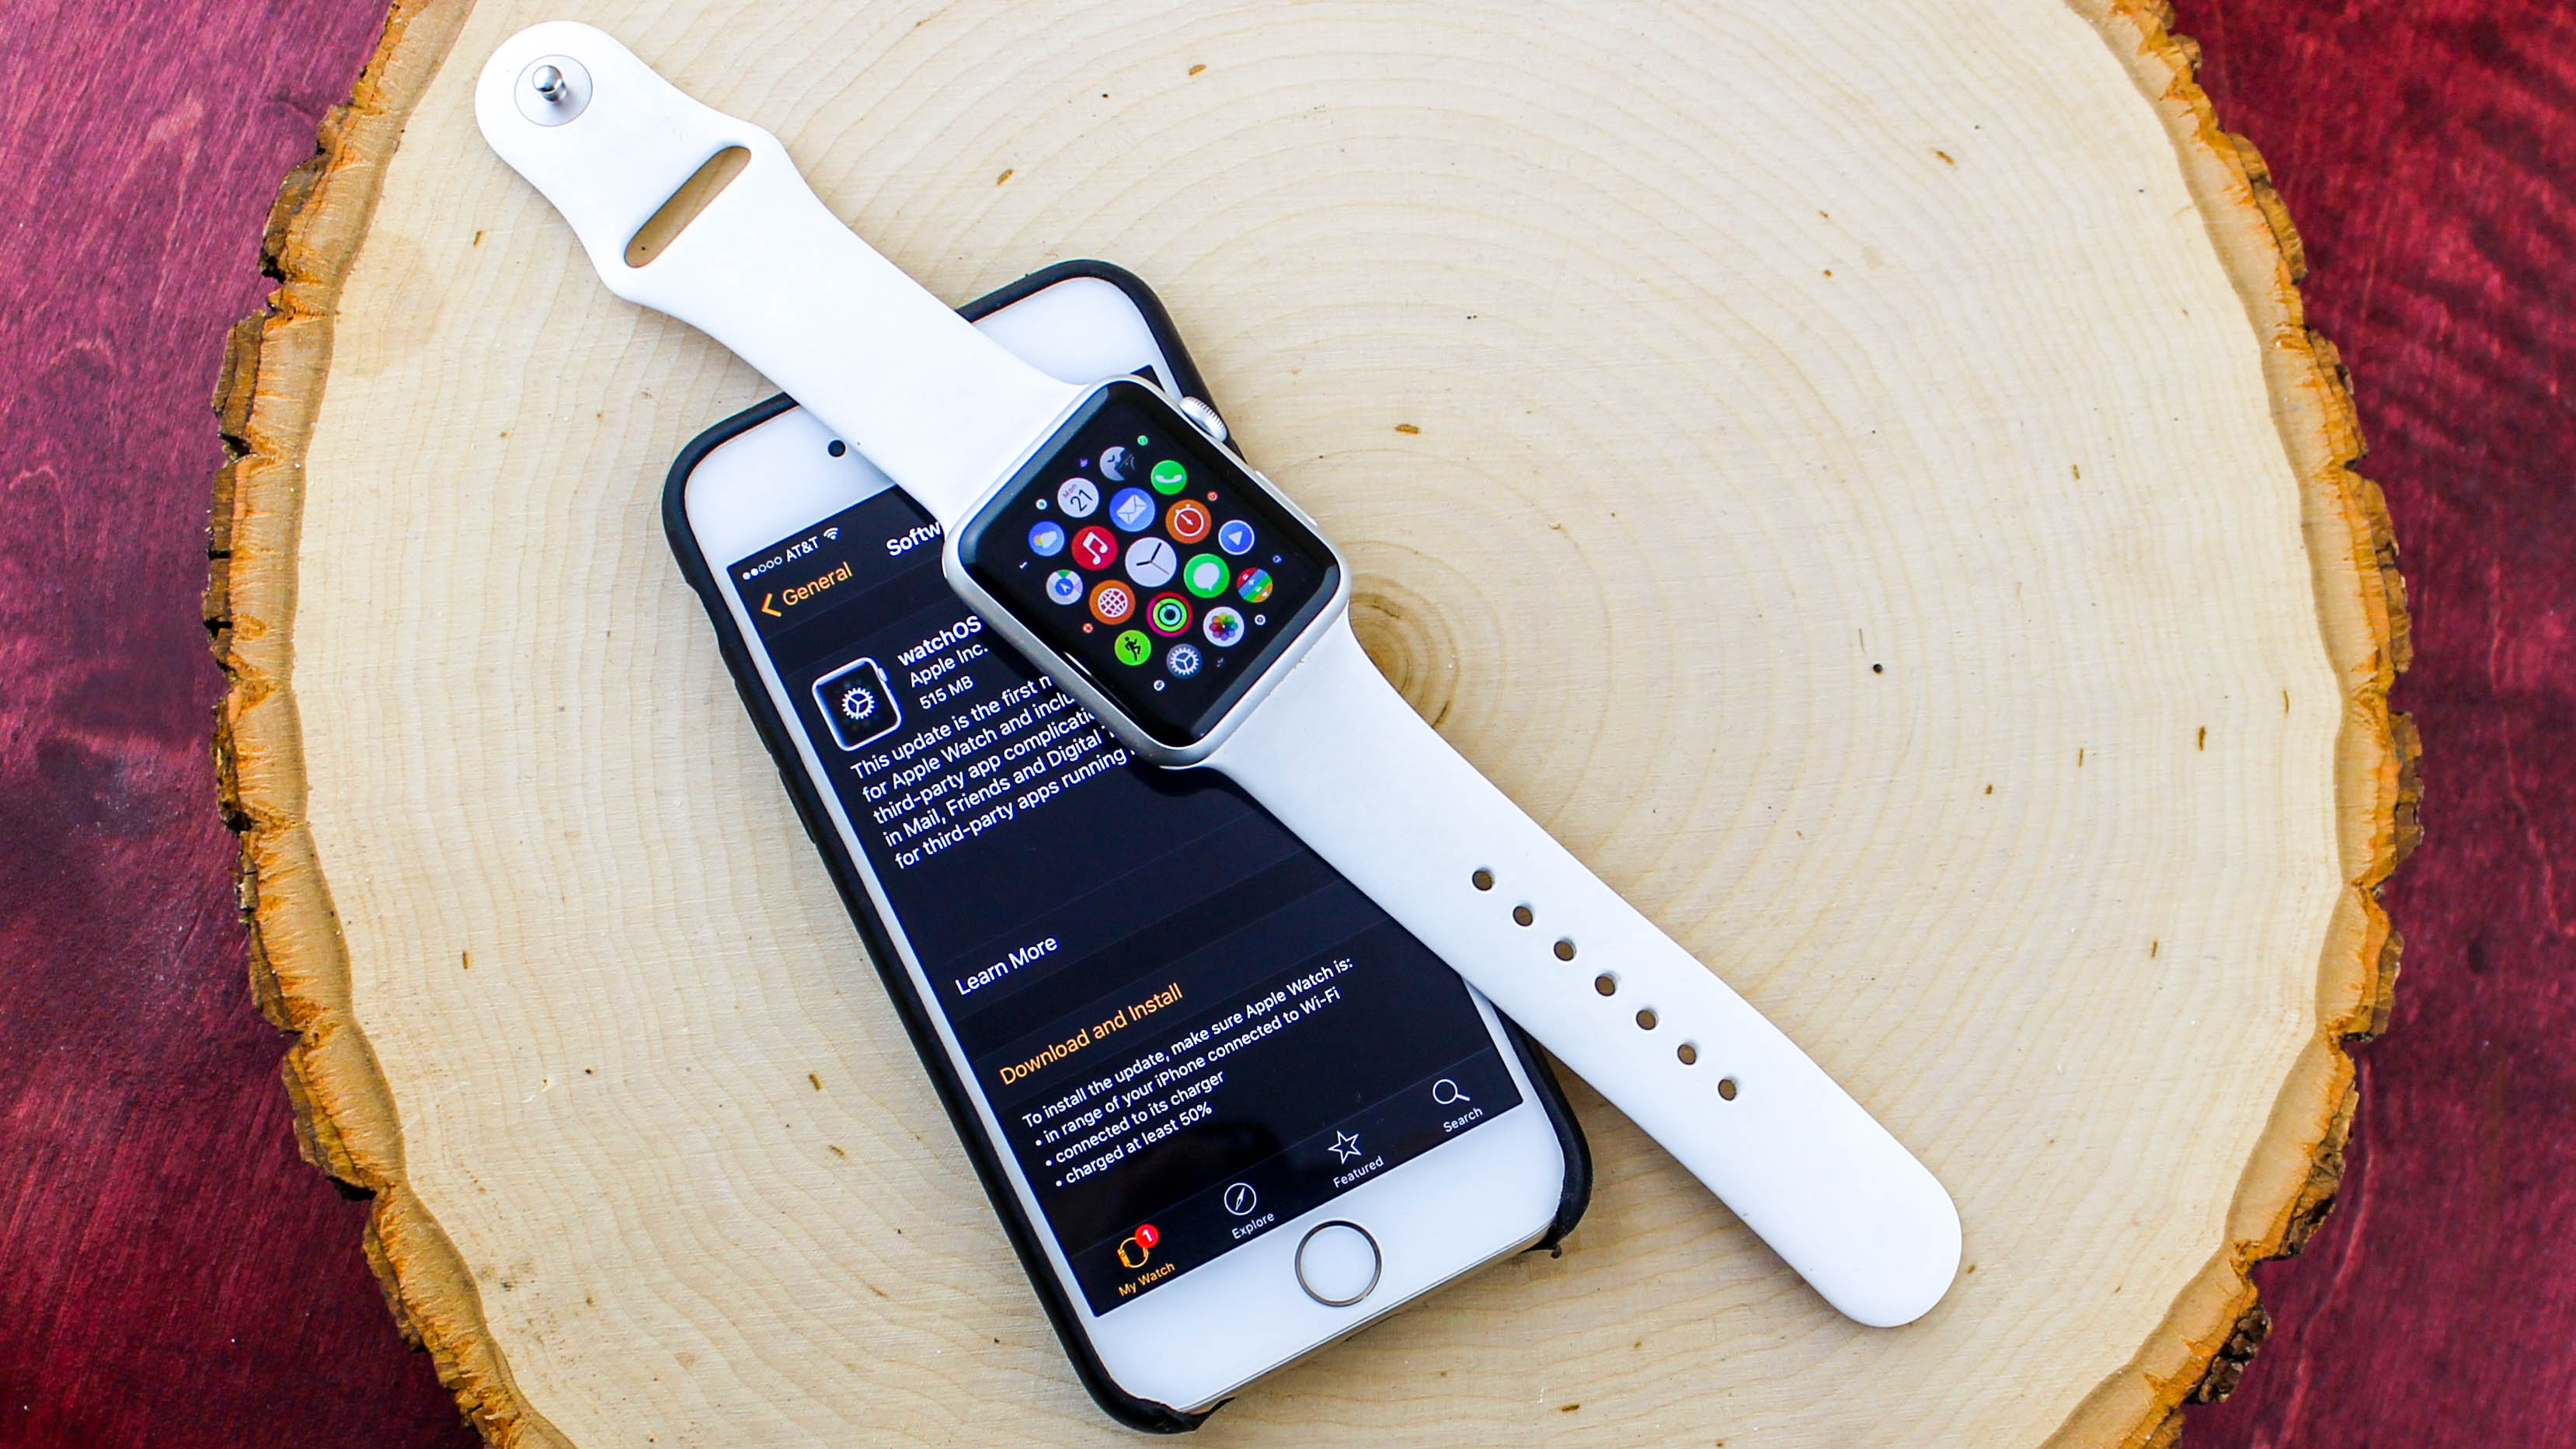 pair apple watch with samsung